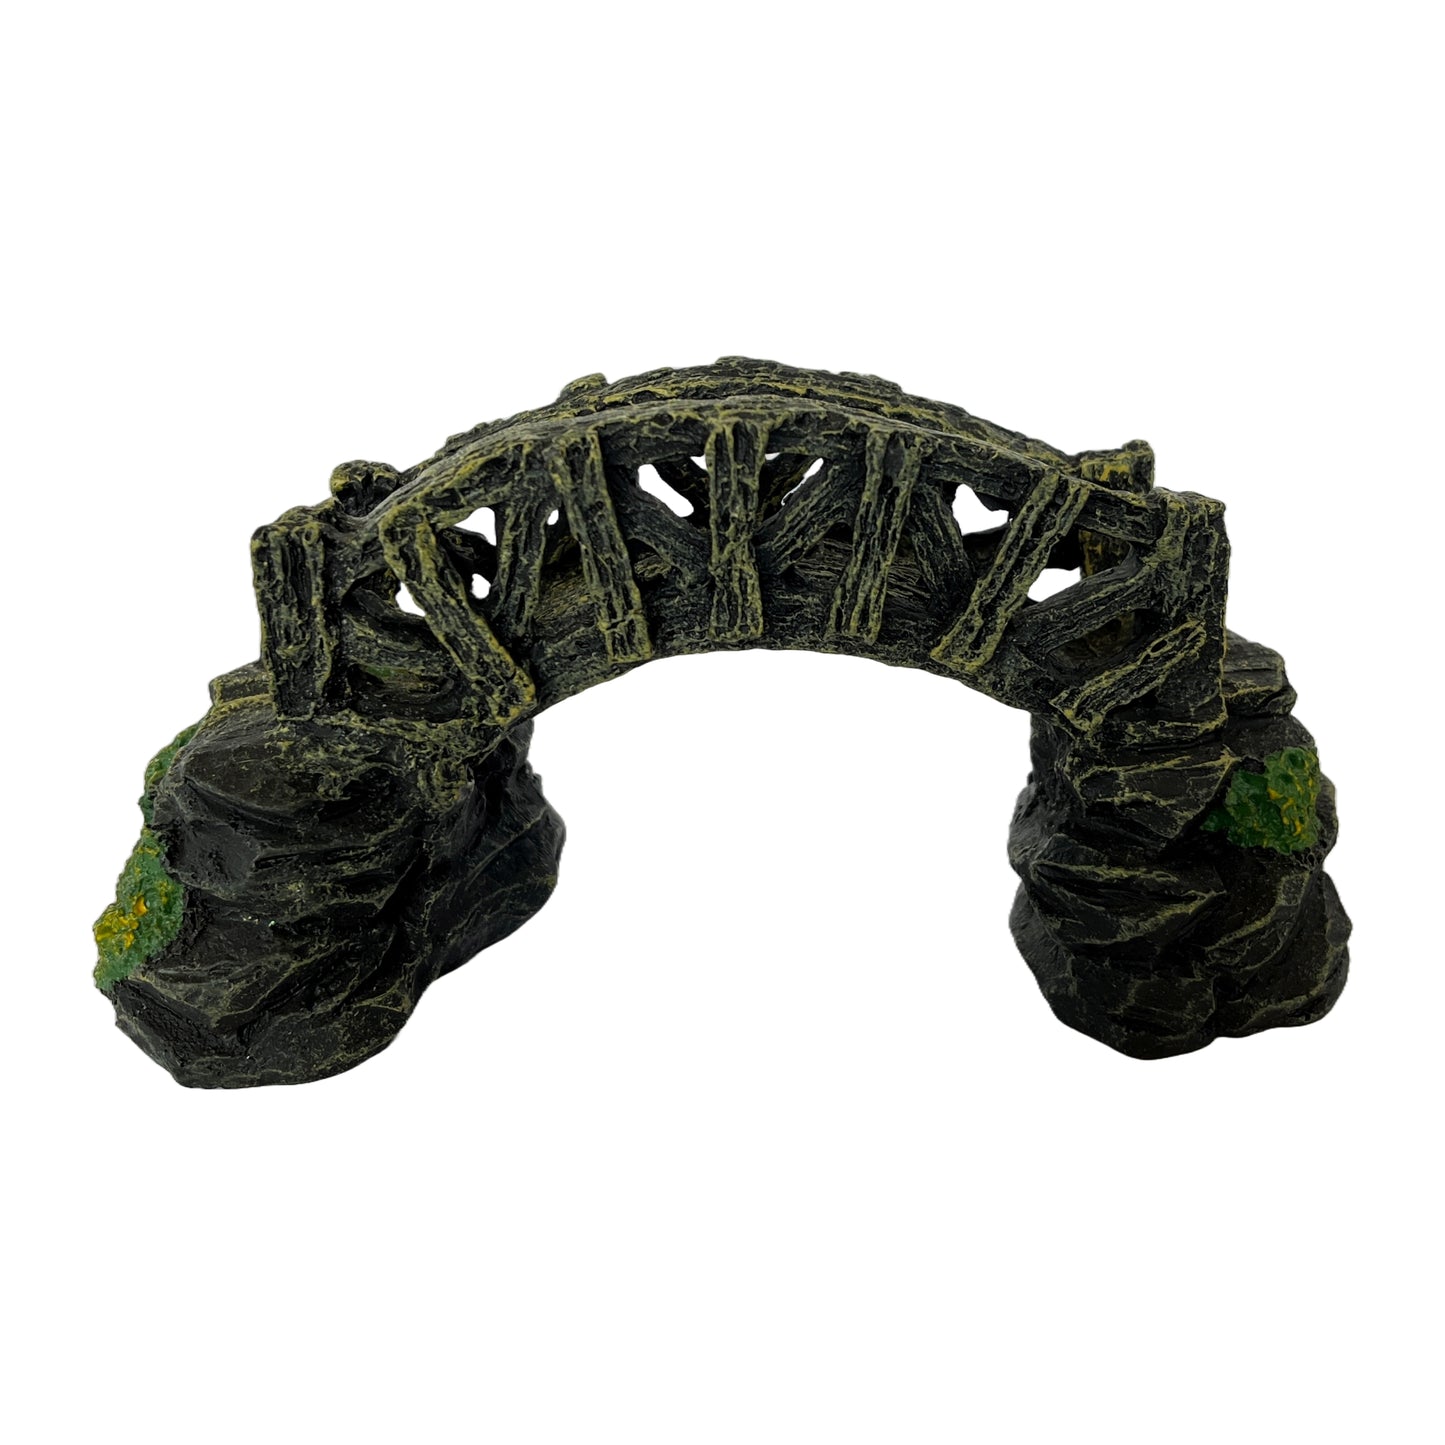 Arch Stone & Wood Bridge available for fairy gardens in Australia